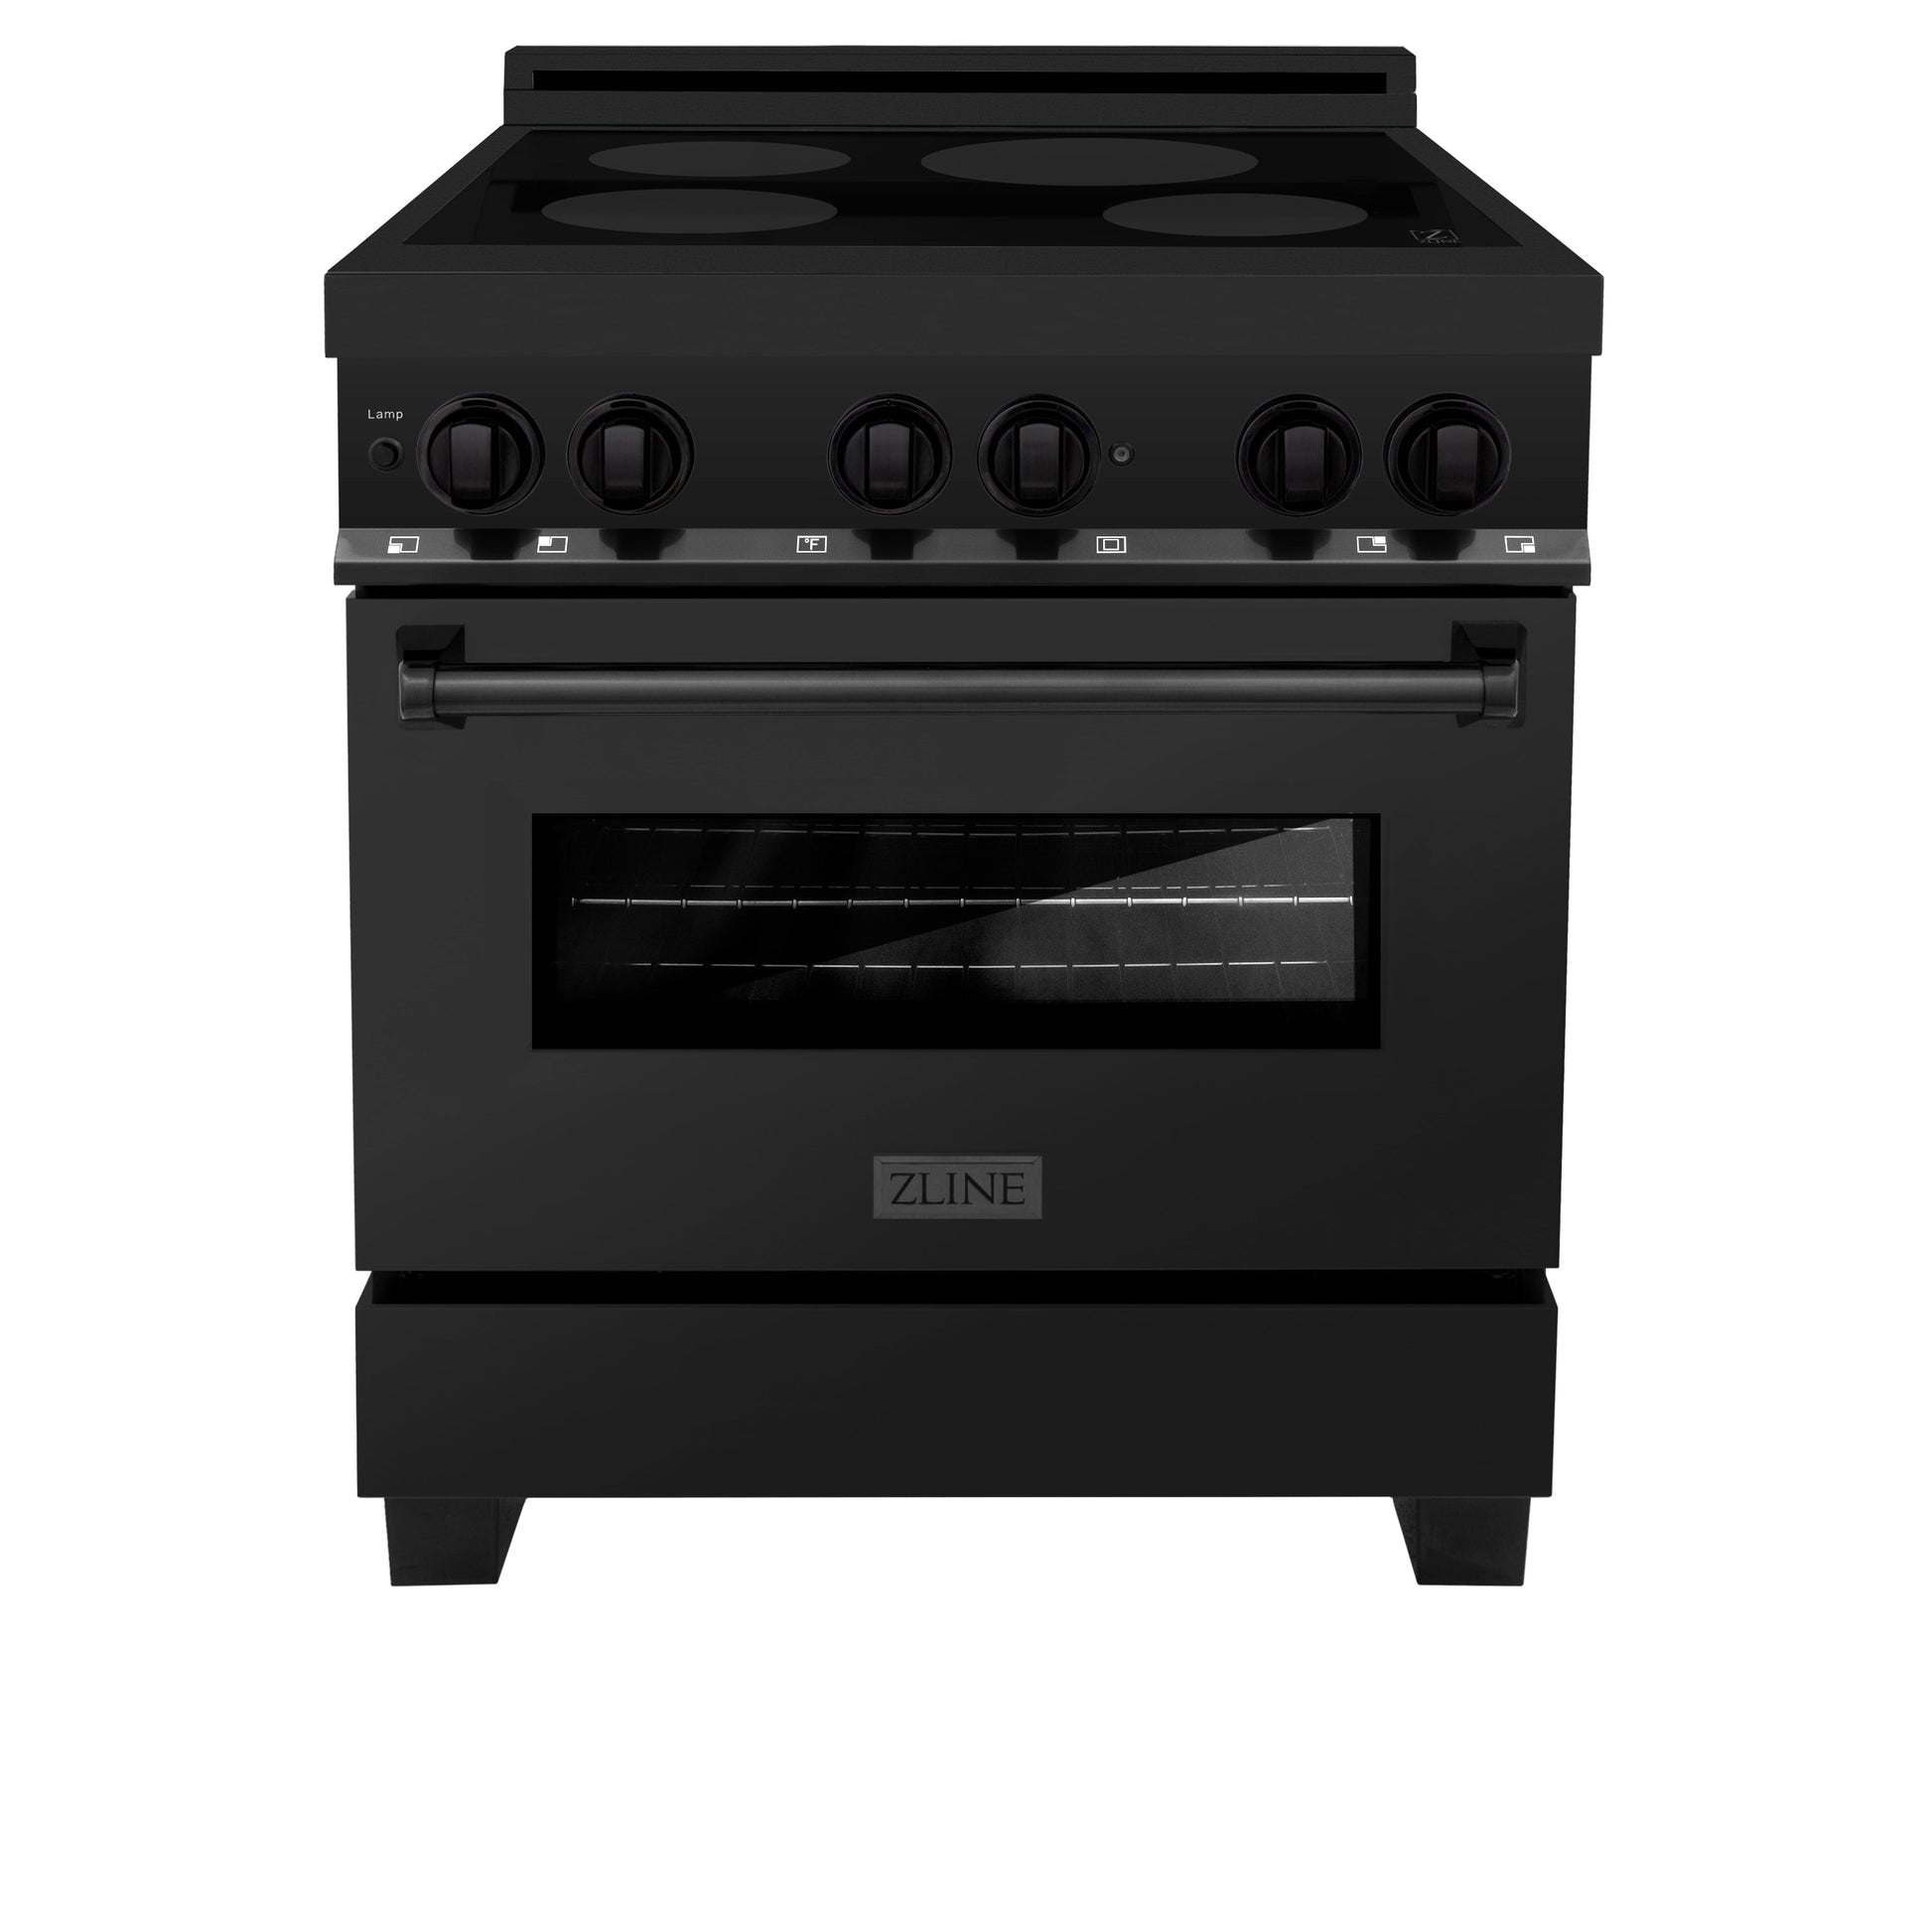 ZLINE 30" Induction Range with 4 Element Stove and Electric Oven - Black Stainless Steel